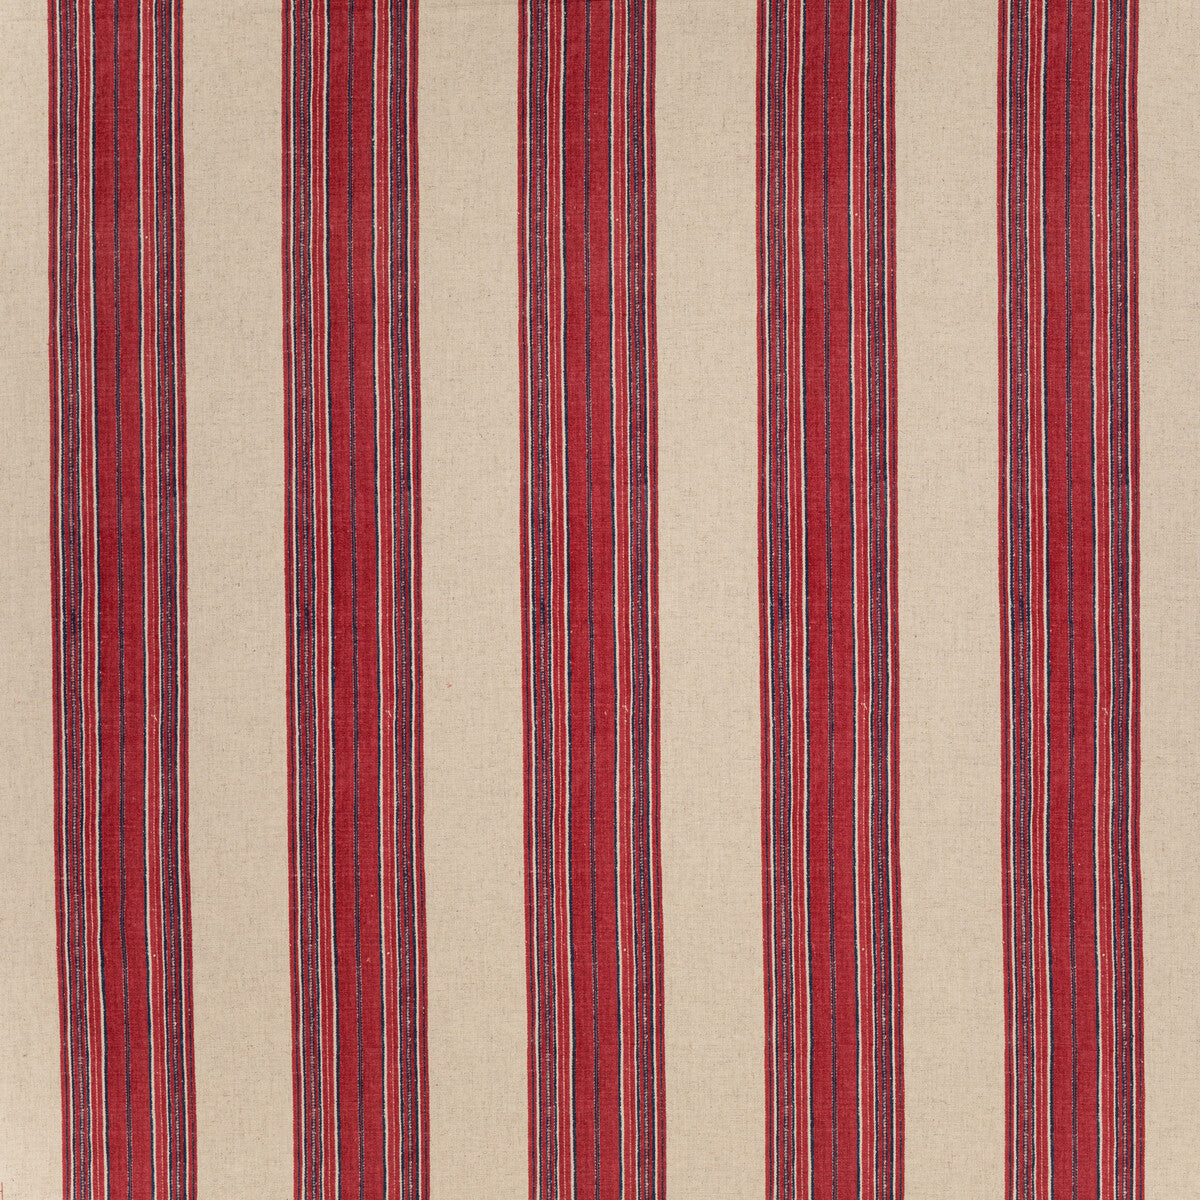 Mifflin Stripe fabric in red color - pattern BFC-3709.19.0 - by Lee Jofa in the Blithfield Eden collection